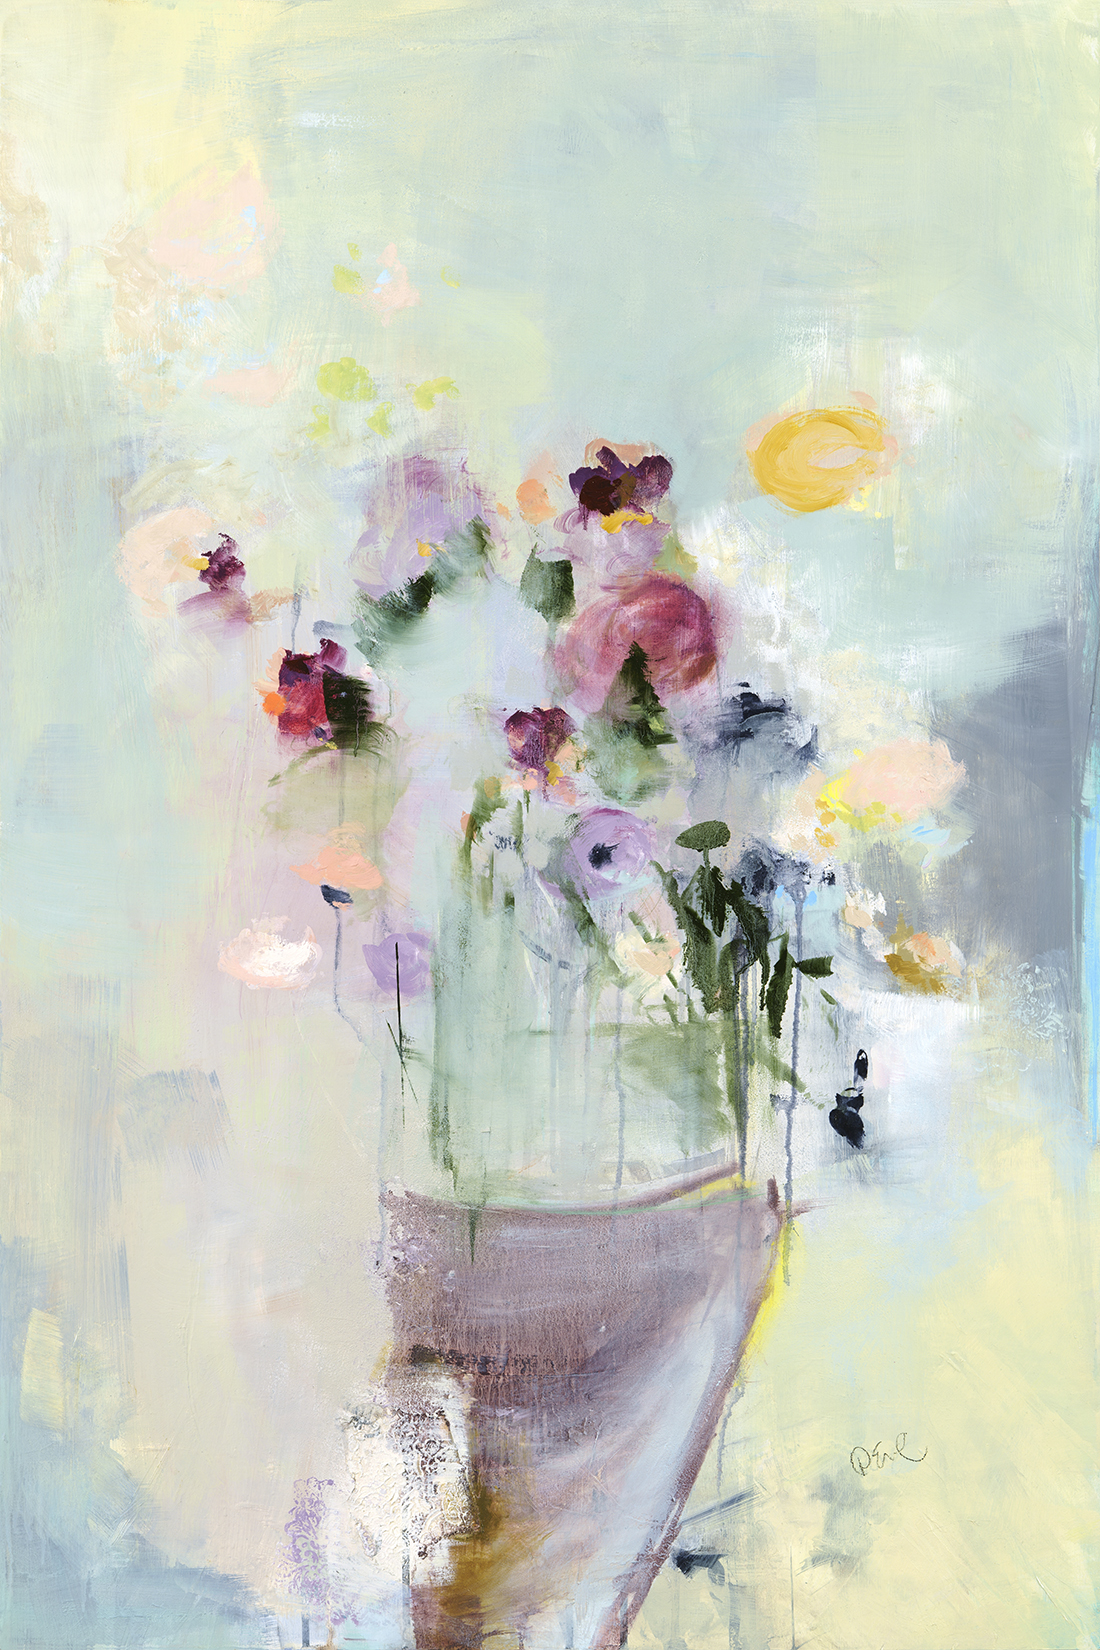 Vanishing, mixed media floral painting by Denna Erickson | Effusion Art Gallery + Cast Glass Studio, Invermere BC